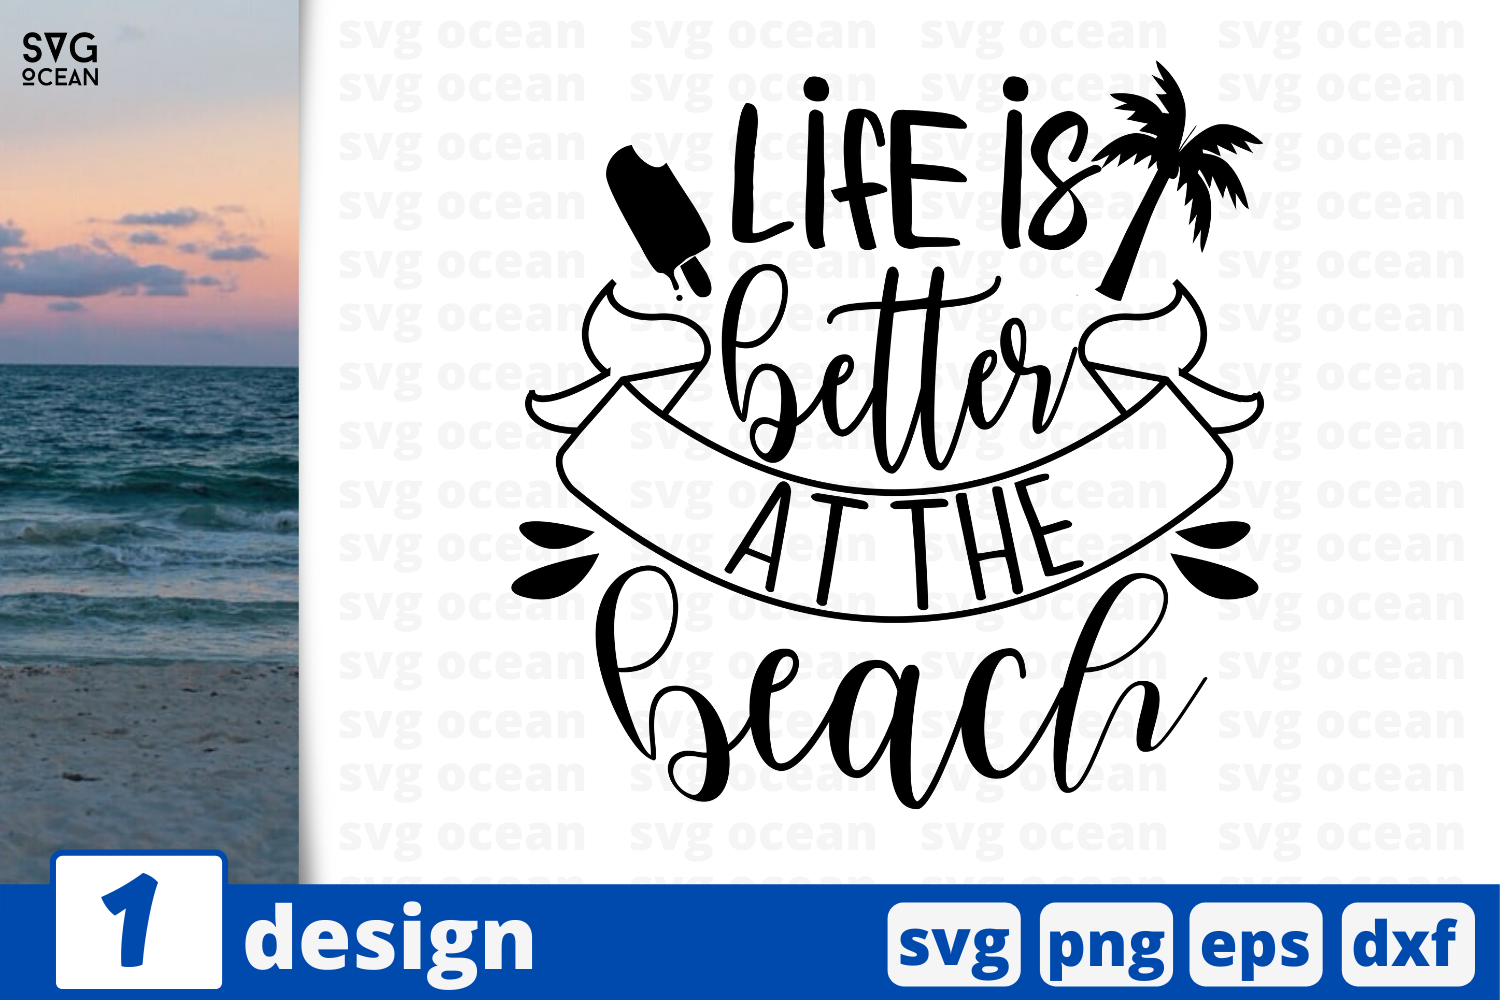 Download 1 Life Is Better At The Beach Svg Bundle Quotes Cricut Svg By Svgocean Thehungryjpeg Com